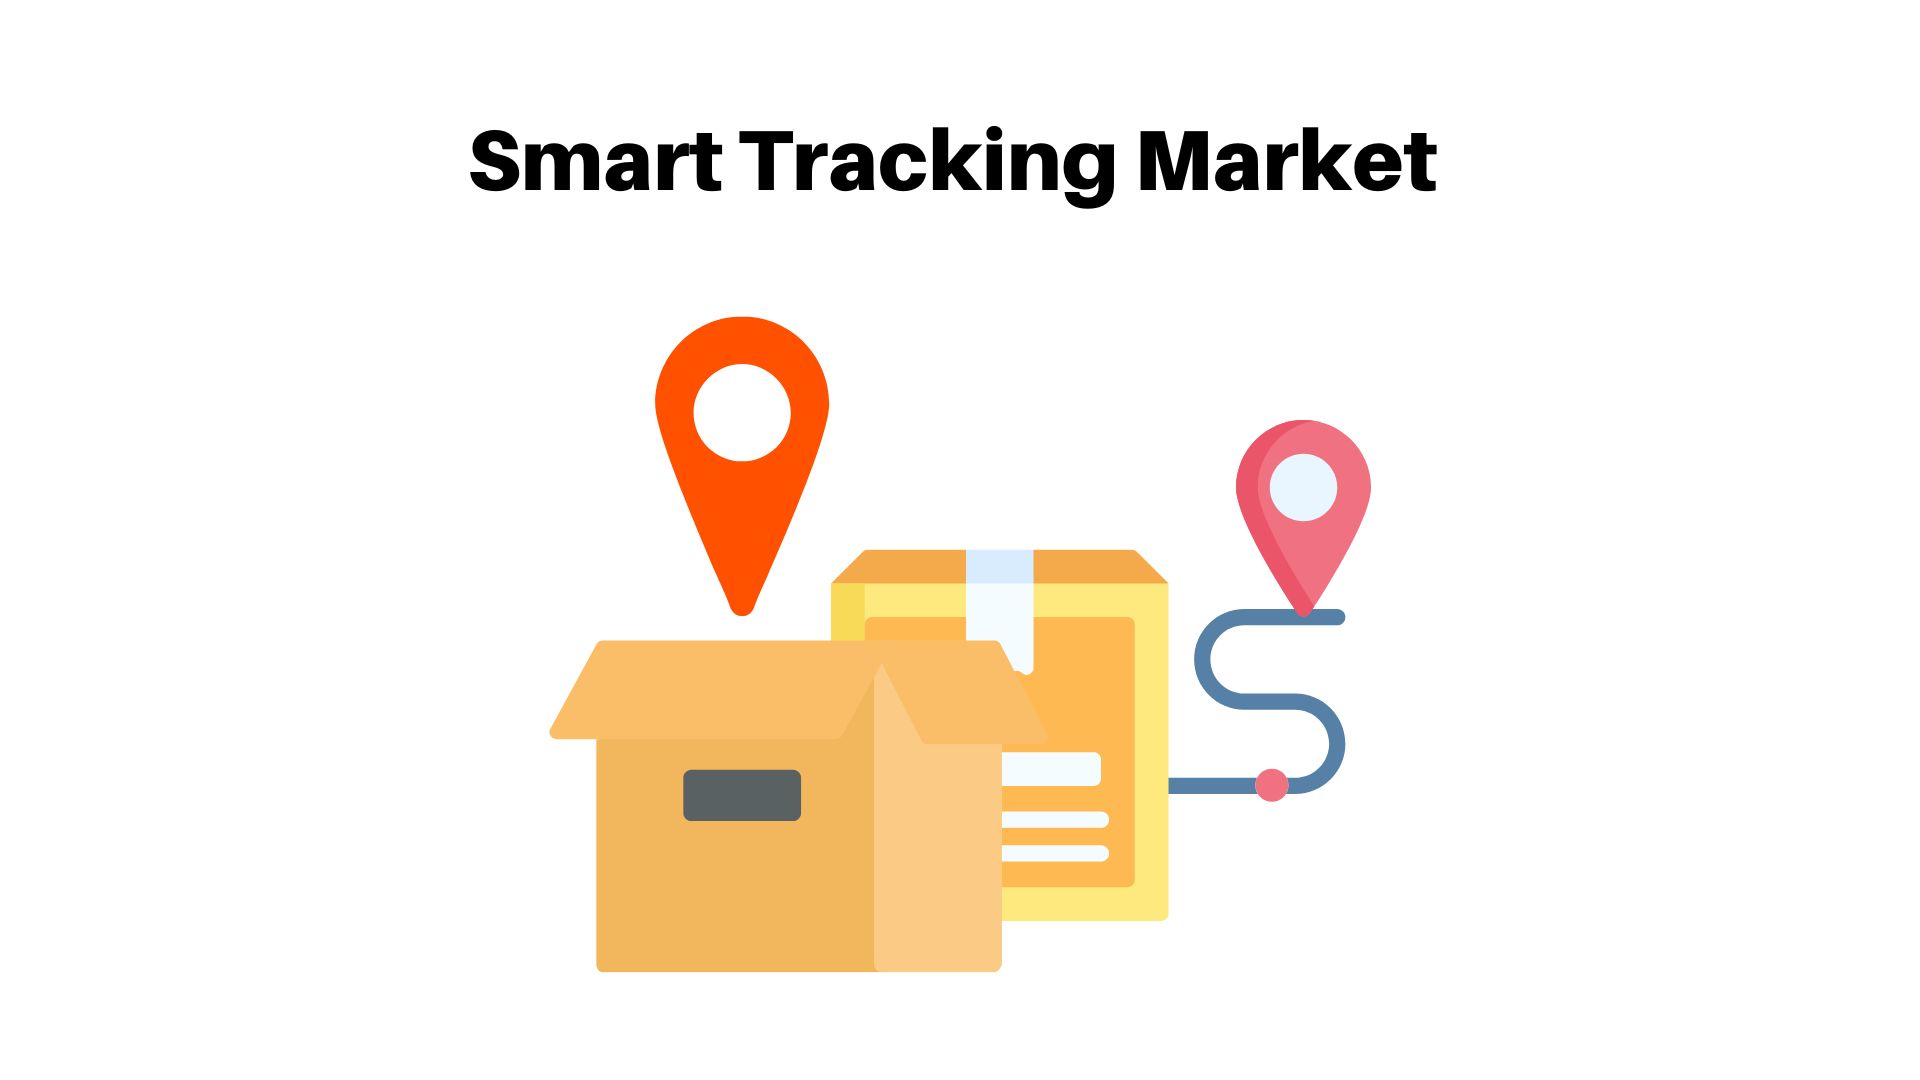 Smart Tracking System Market Growth driven by logistics and transportation sectors, Market.us